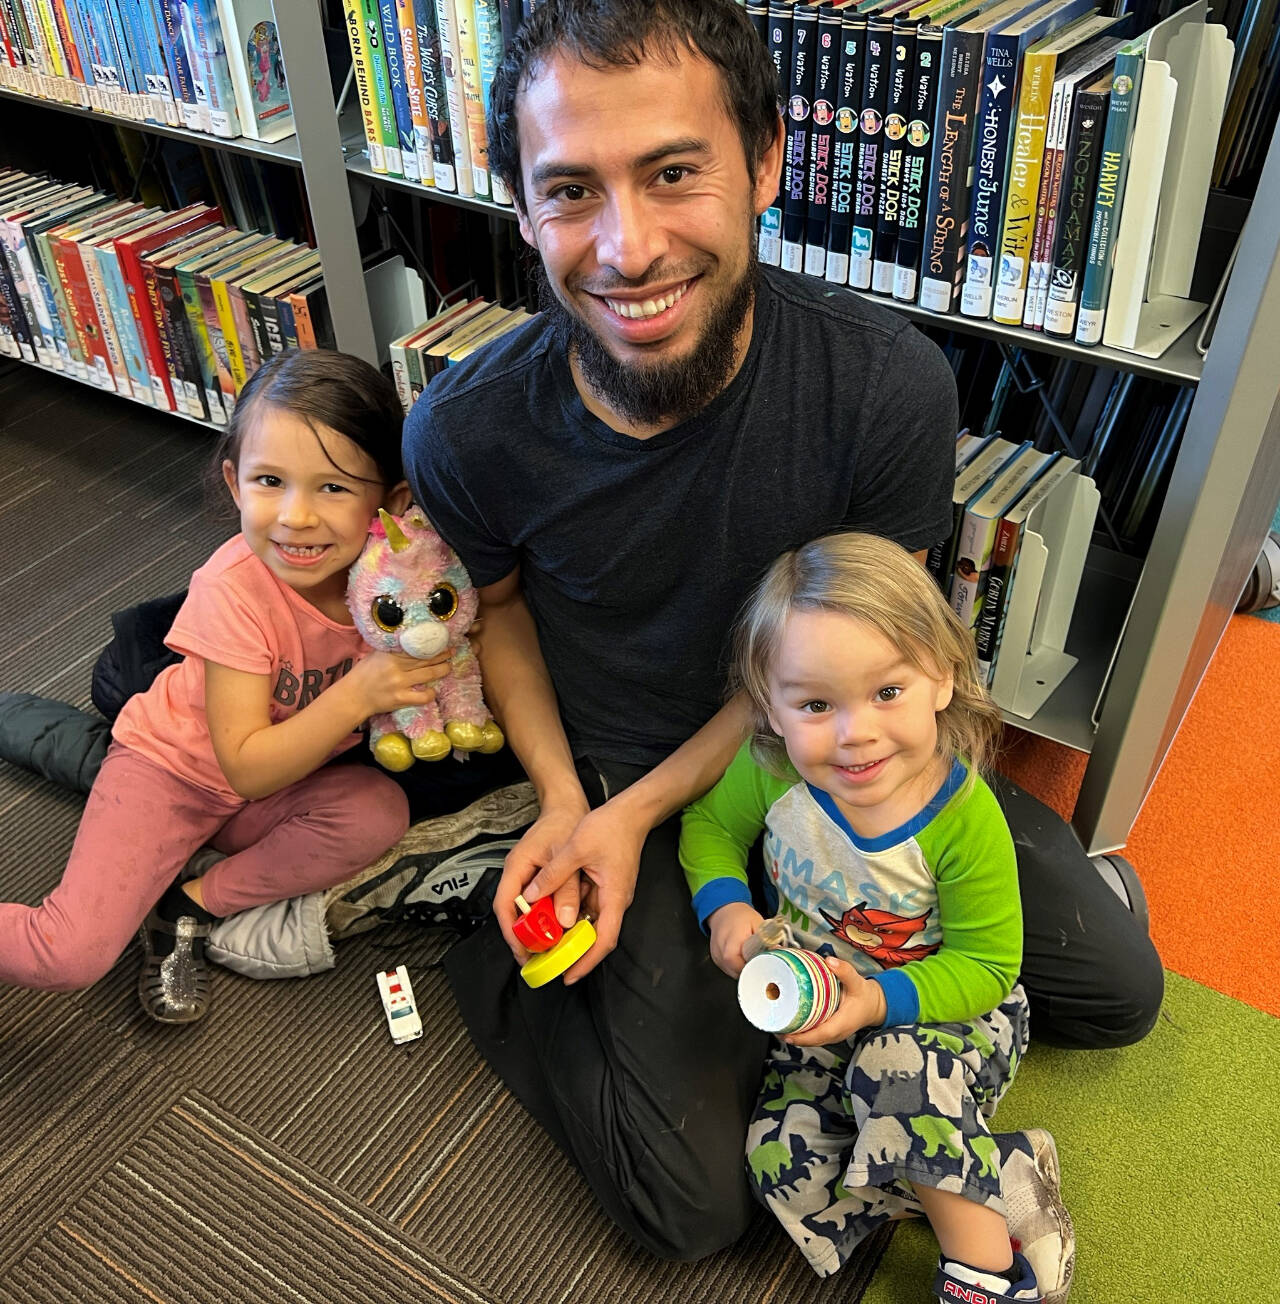 Photo courtesy of North Olympic Library System / Celebrate el Día del Niño/Children’s Day with the North Olympic Library System in Forks on April 27 and in Sequim on April 30.